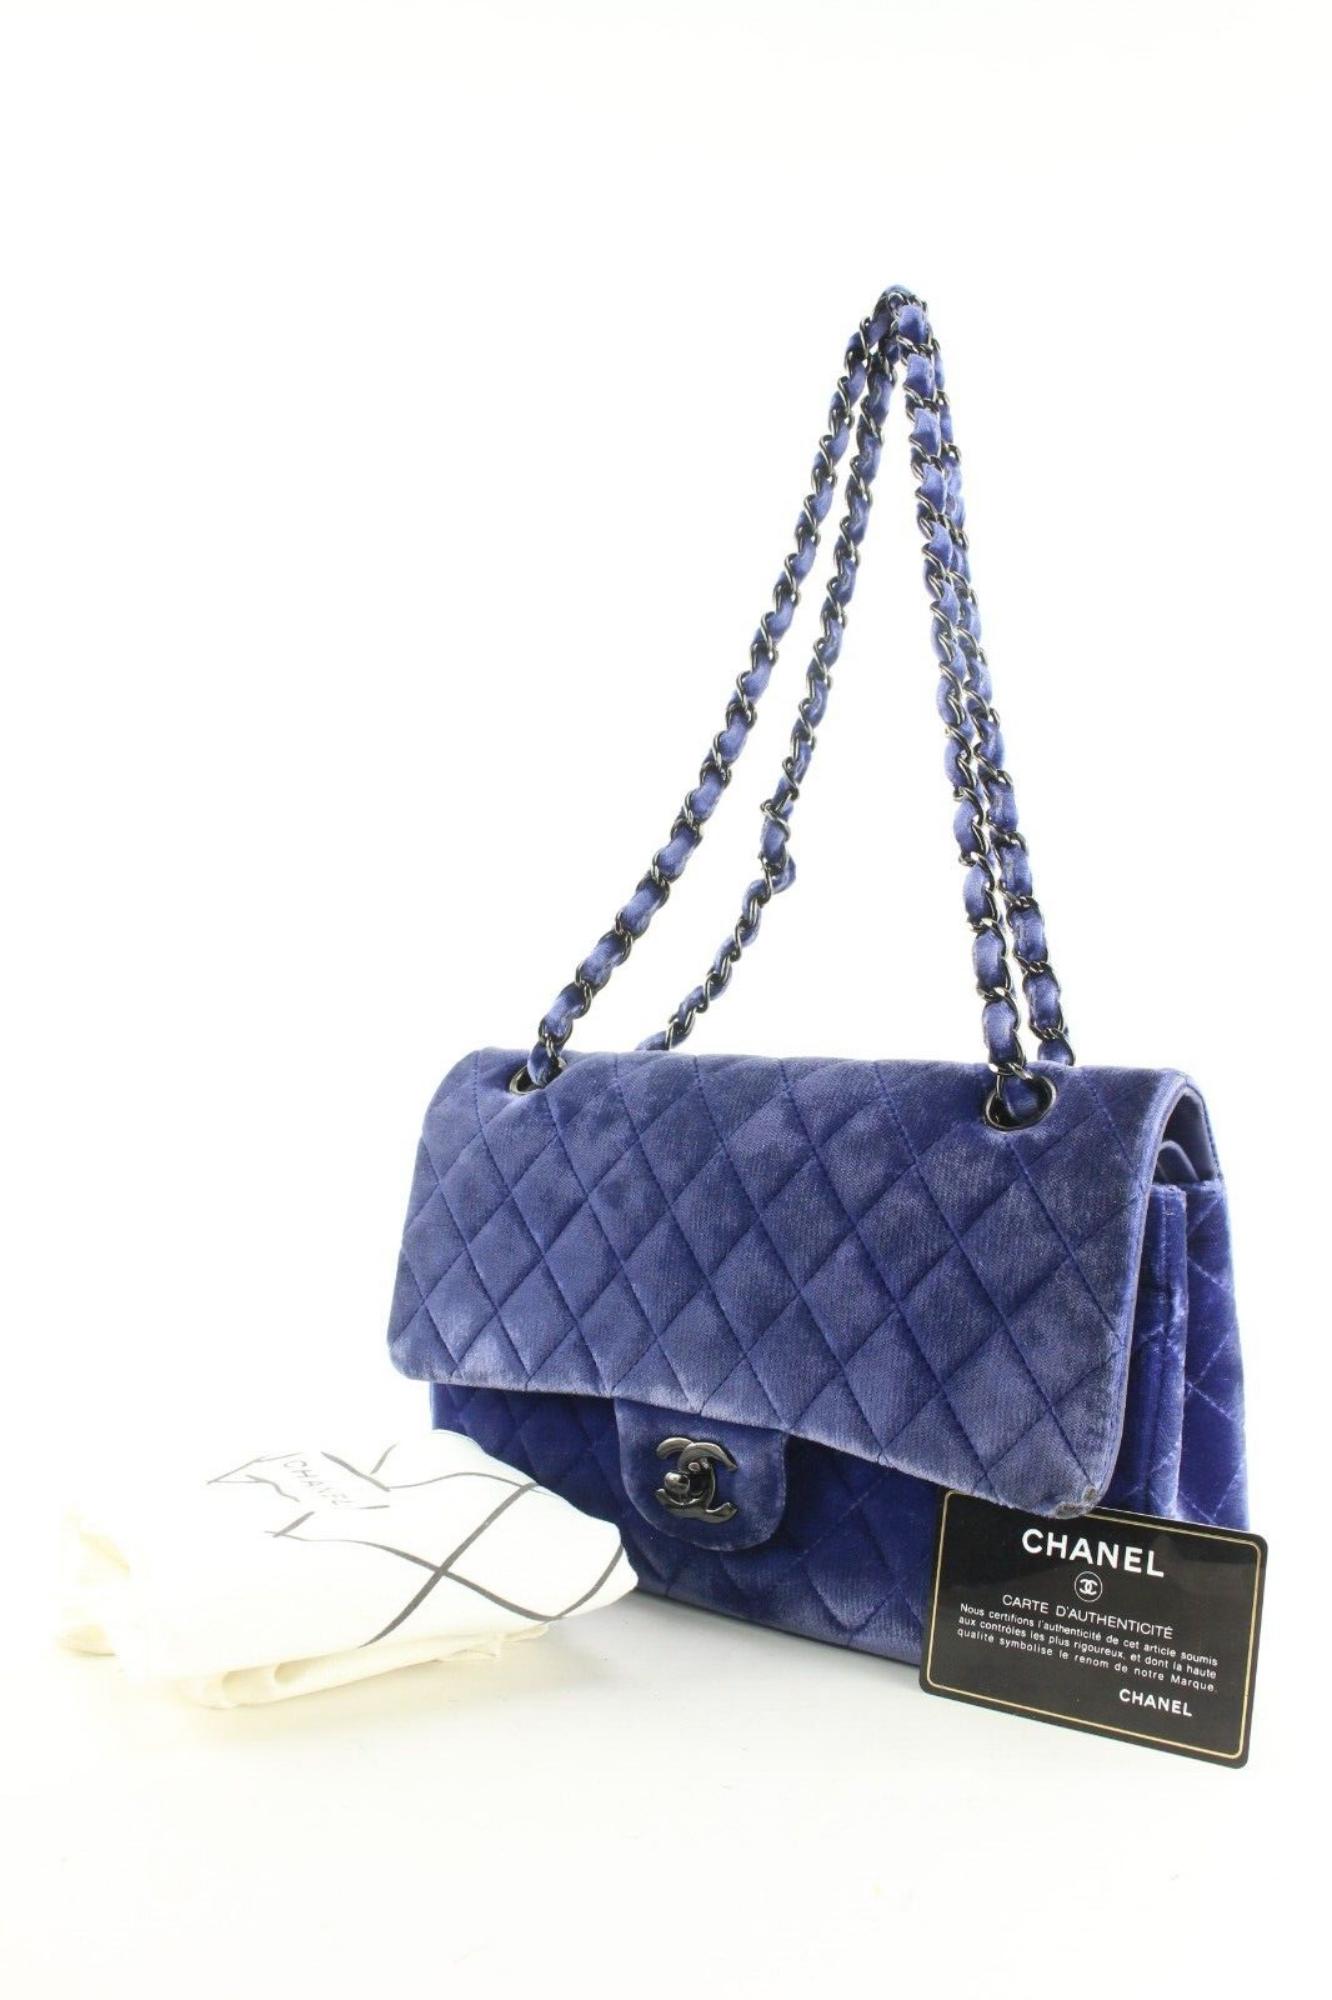 Chanel Blue Quilted Velour Medium Classic Flap Velvet 2CC0406
Date Code/Serial Number: 20272500

Made In: France

Measurements: Length:  10